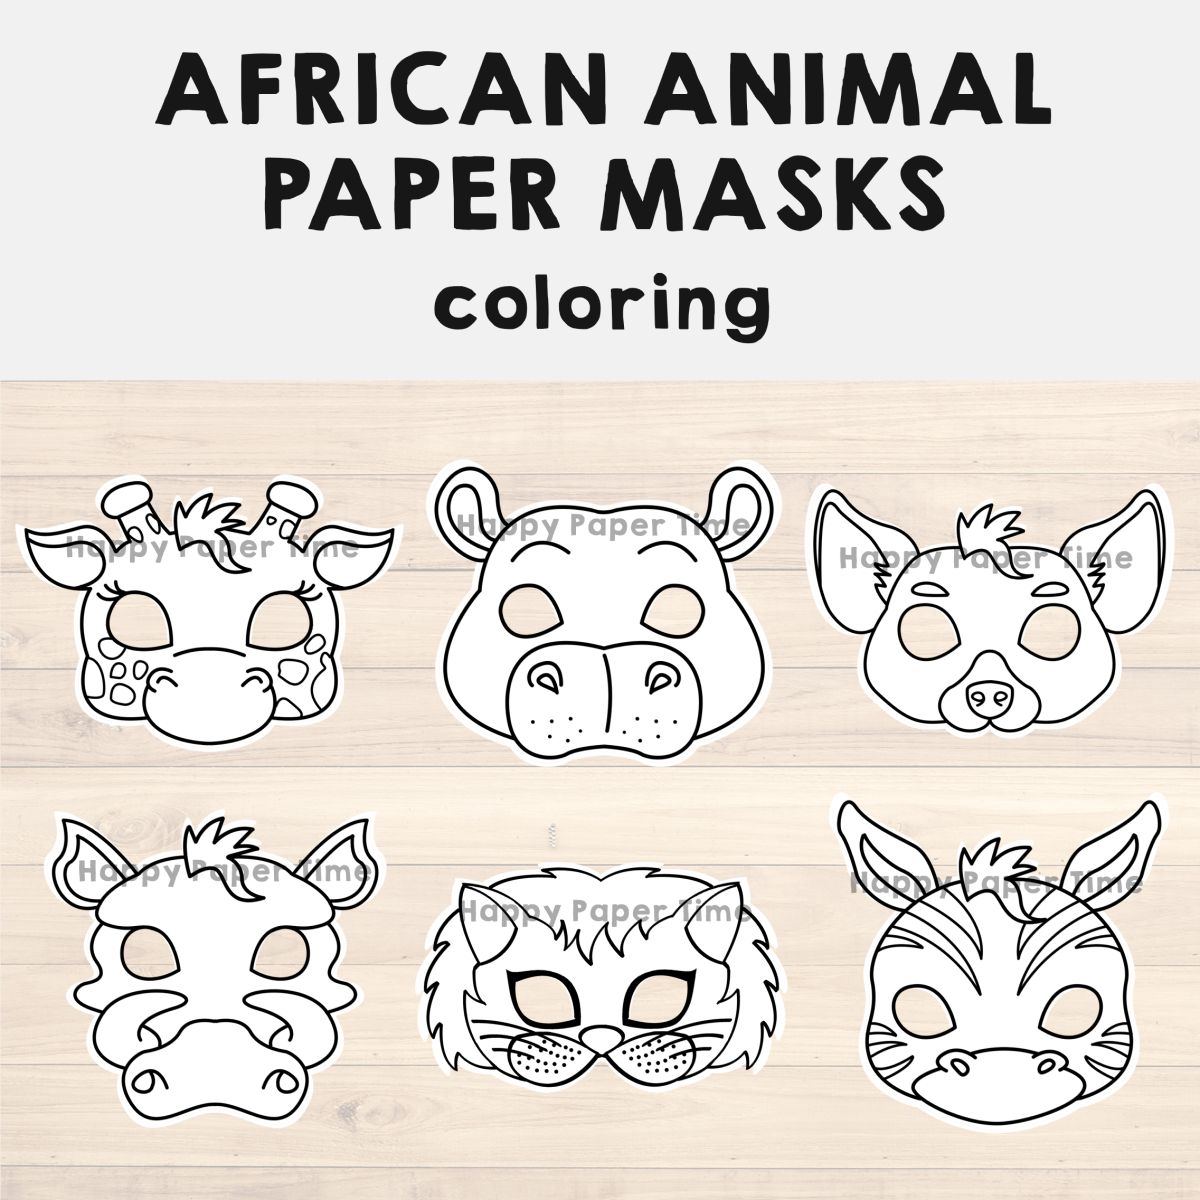 African animal paper masks printable safari coloring craft activity costume made by teachers